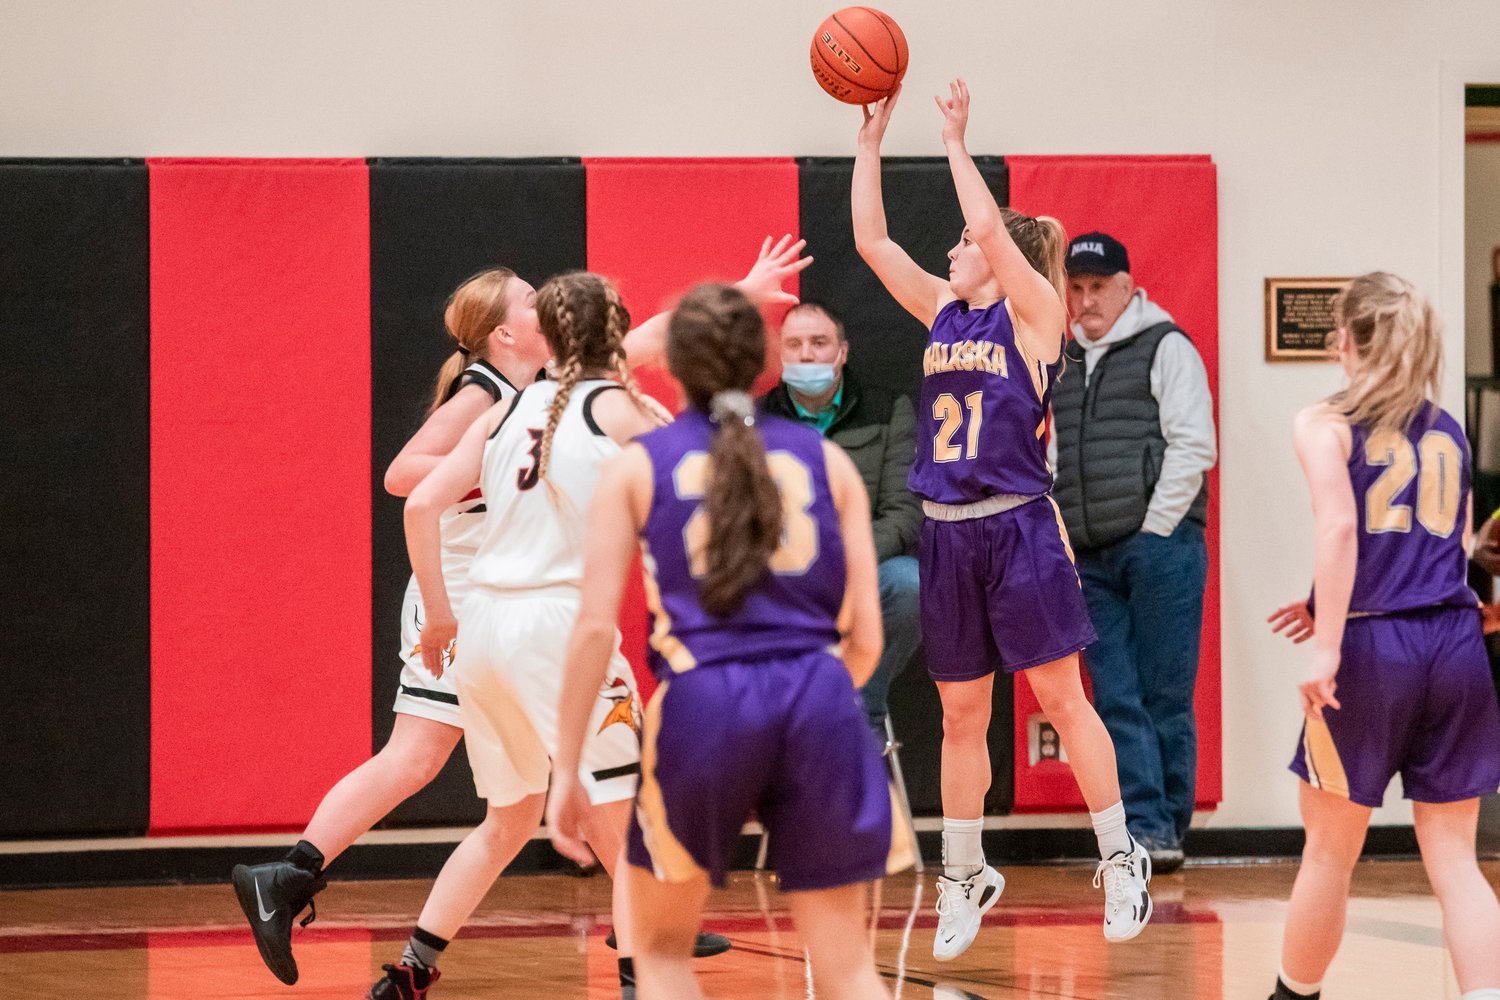 Onalaska’s Callie Lawrence (21) puts up a three-point shot Wednesday night at Mossyrock High School.